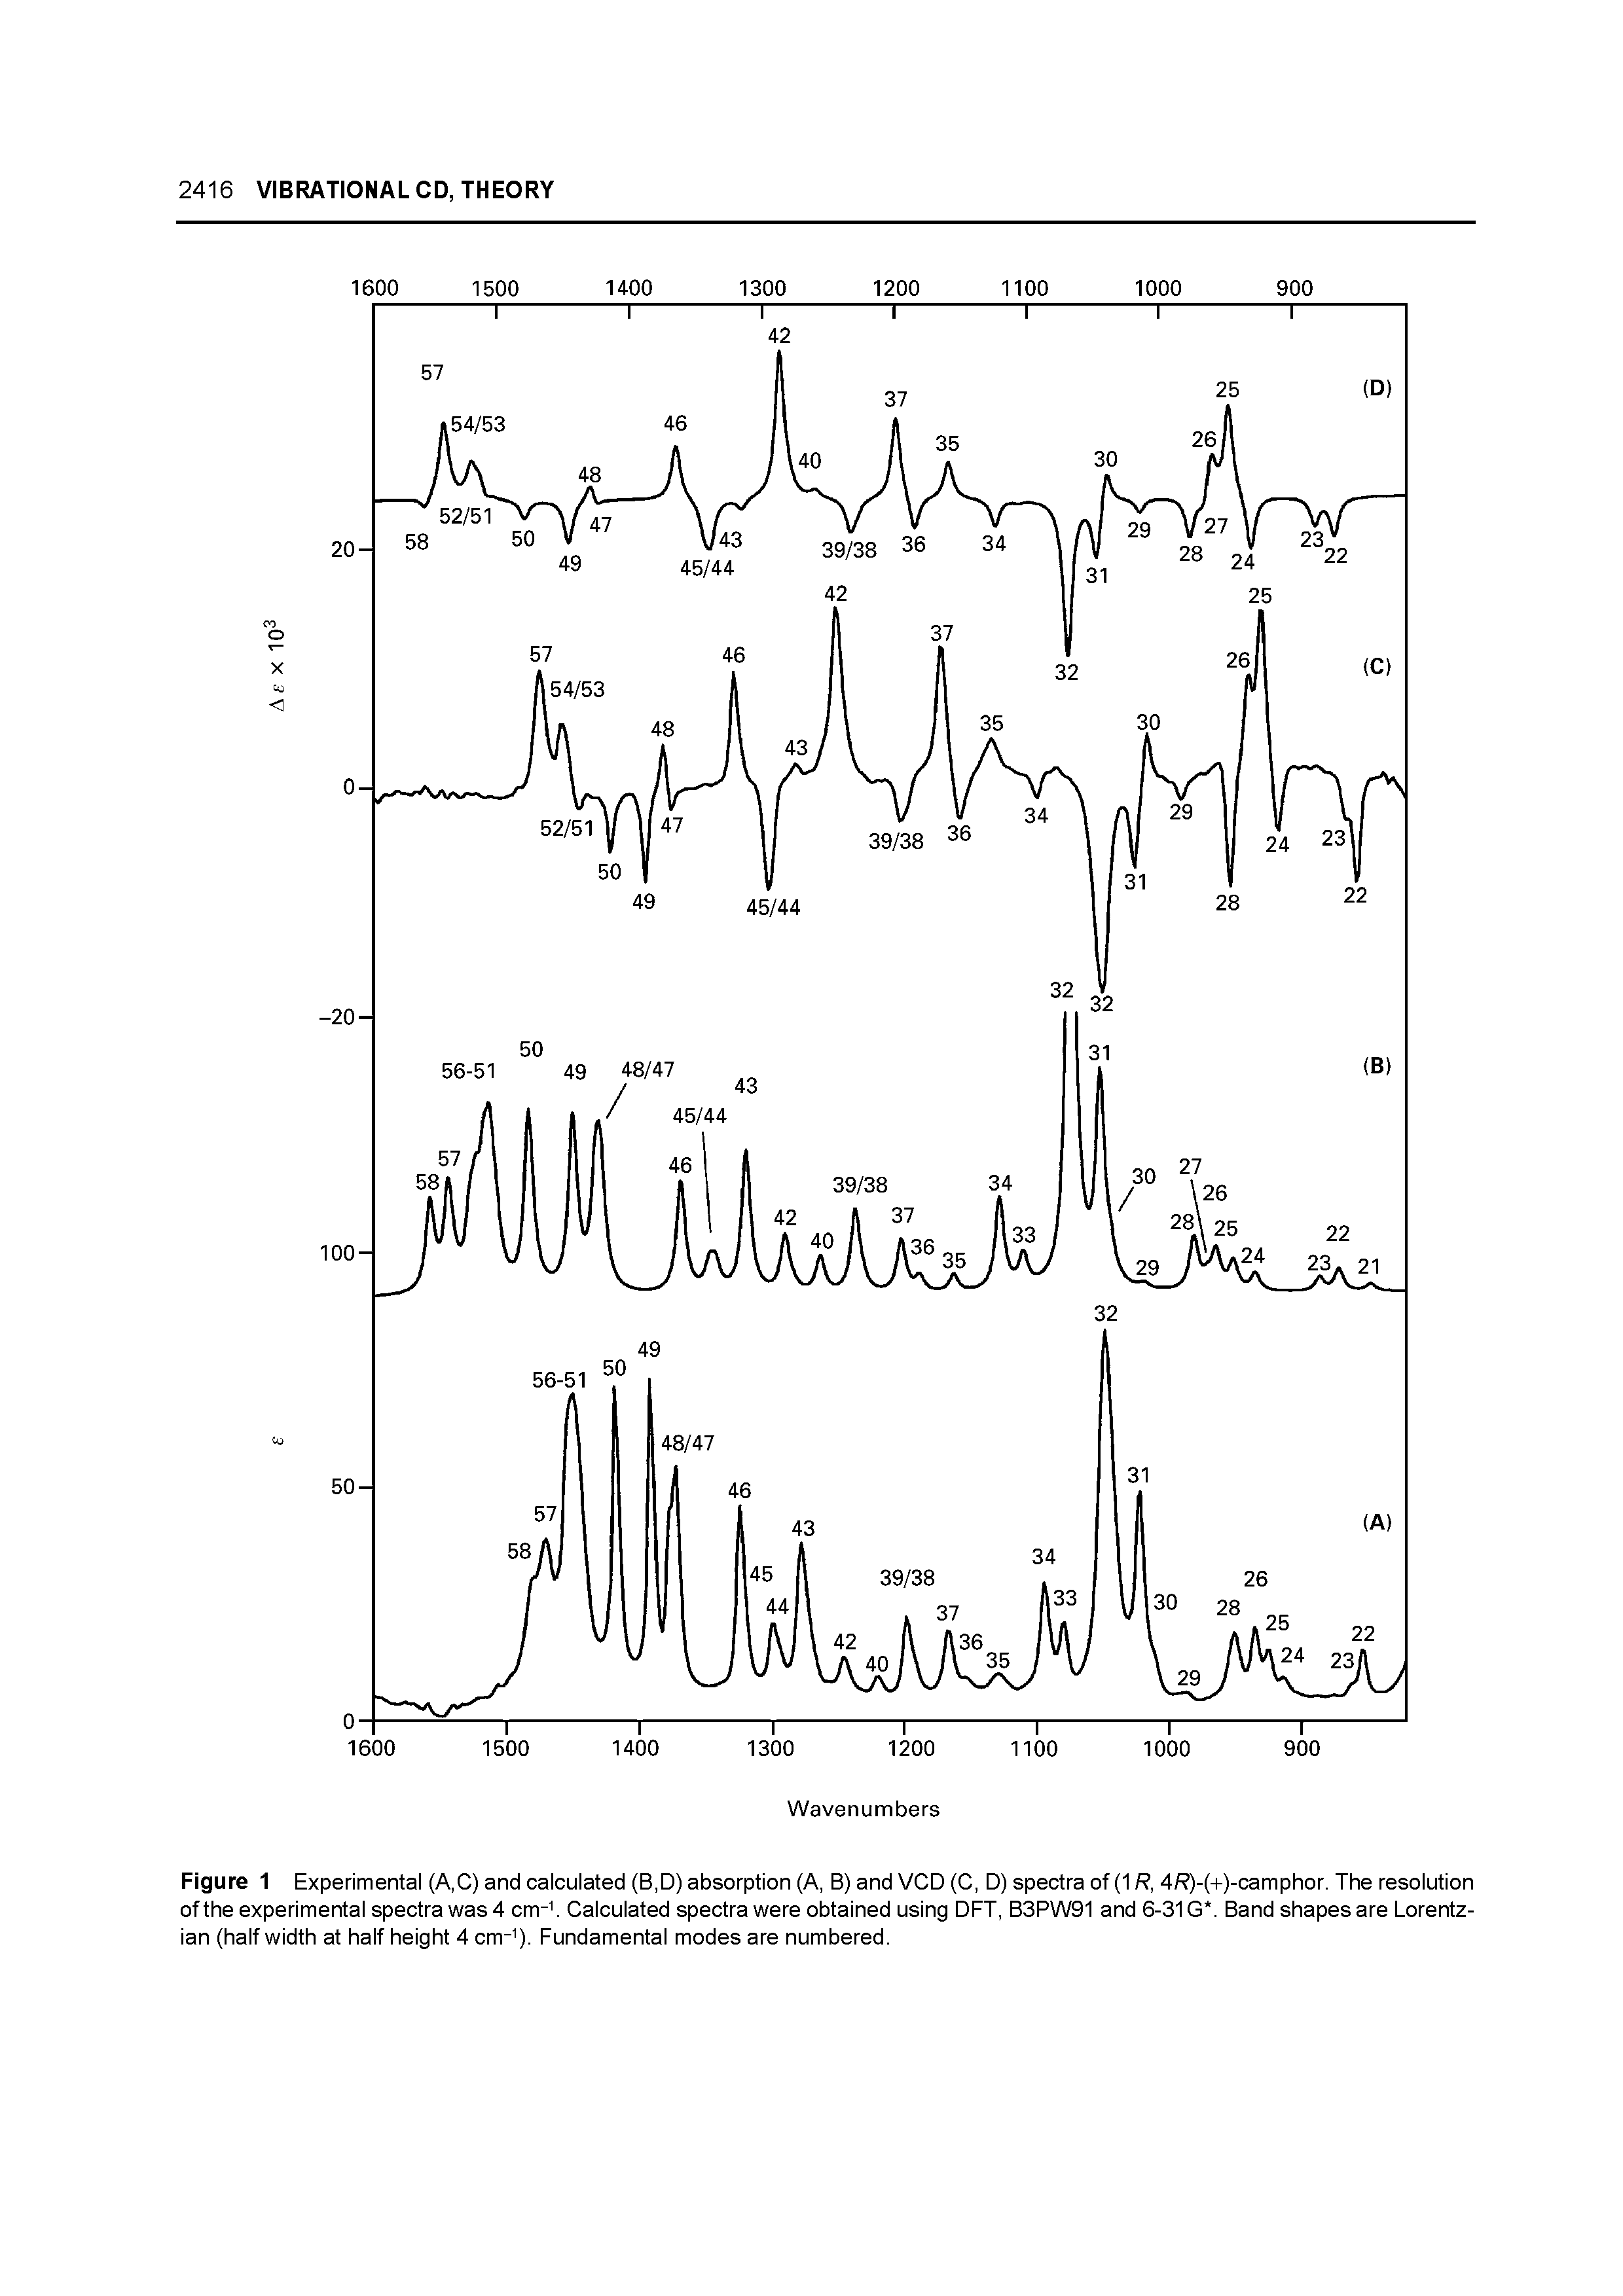 Figure 1 Experimental (A,C) and calculated (B,D) absorption (A, B) and VCD (C, D) spectra of (1R, 4/ )-(+)-camphor. The resolution of the experimental spectra was 4 cm-. Calculated spectra were obtained using DFT, B3PW91 and 6-31G. Band shapes are Lorentz-ian (half width at half height 4 cm- ). Fundamental modes are numbered.